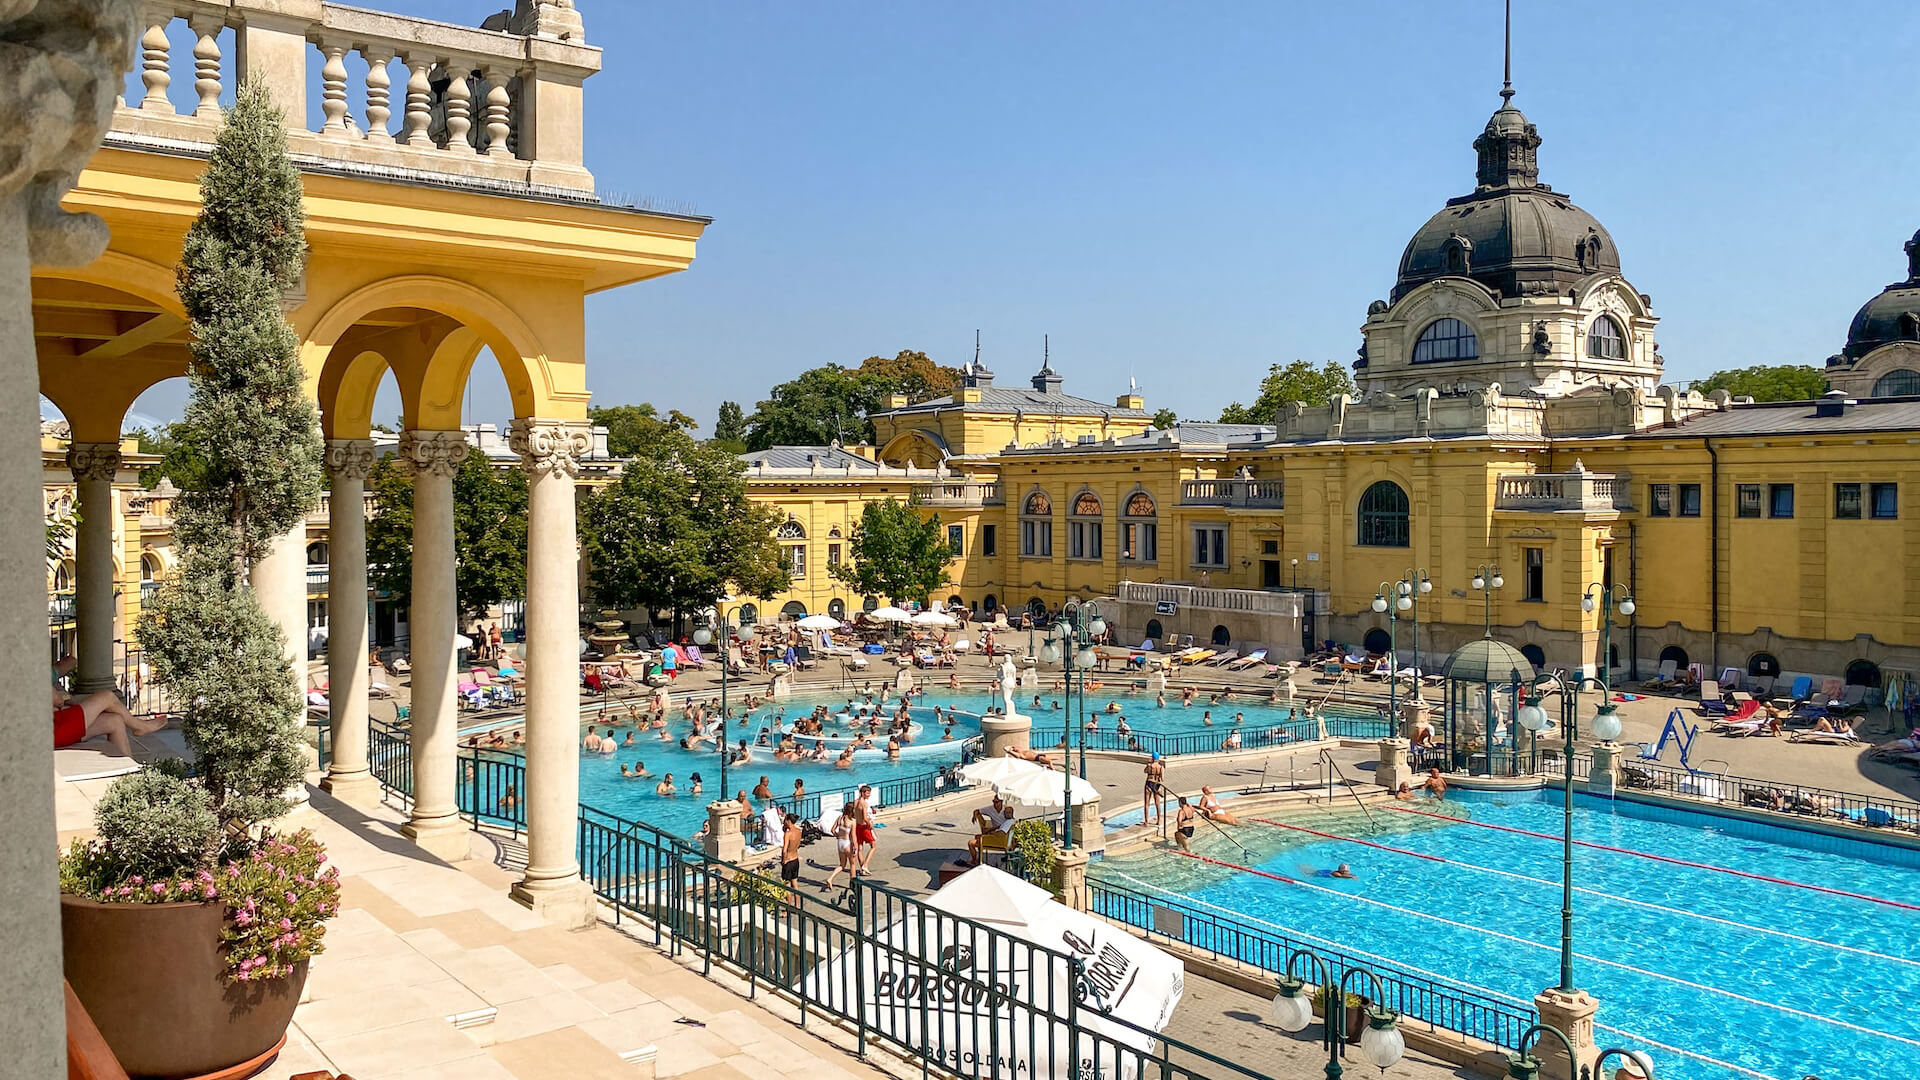 Photo showing a view of the Széchenyi Medicinal Bath